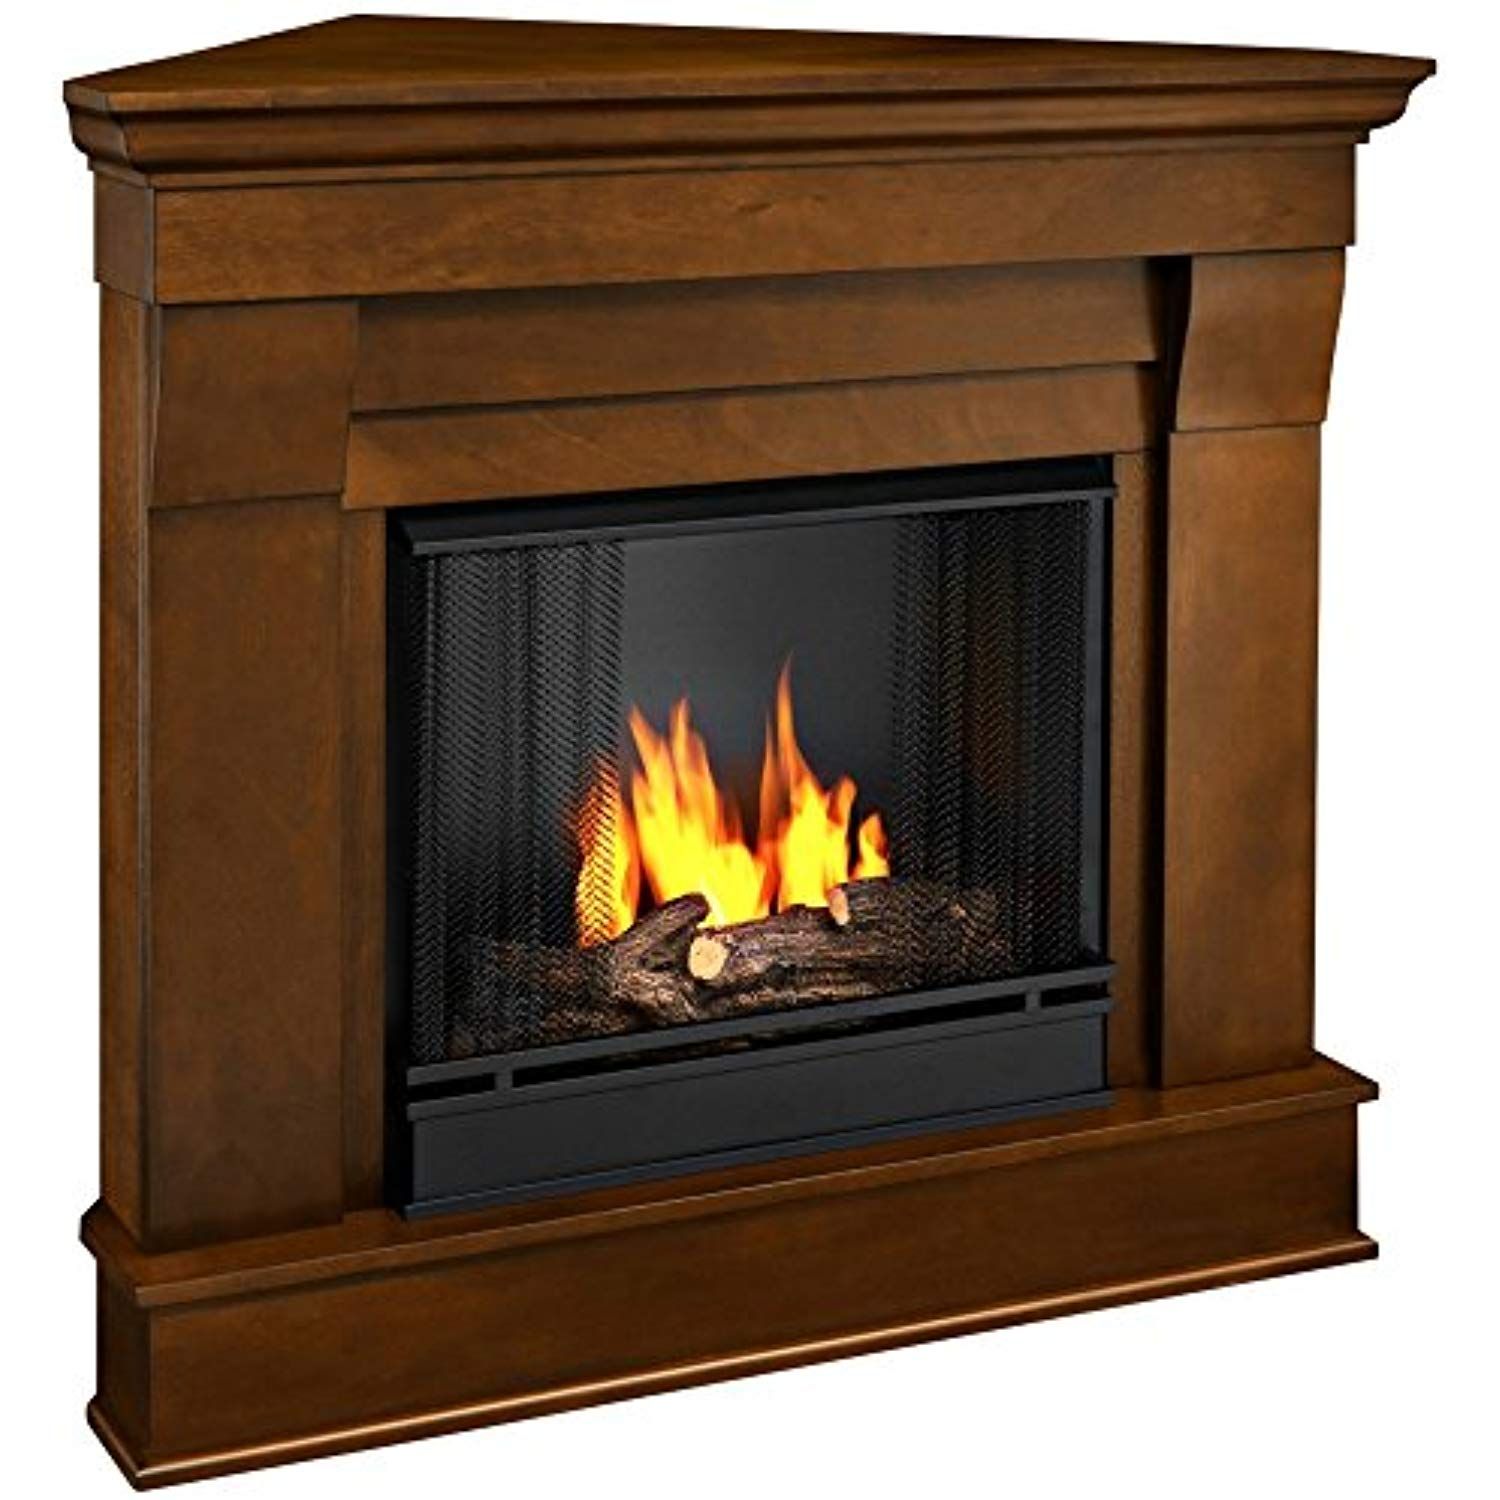 Real Flame Silverton Electric Fireplace New Duraflame Freestanding Infrared Quartz Fireplace Stove